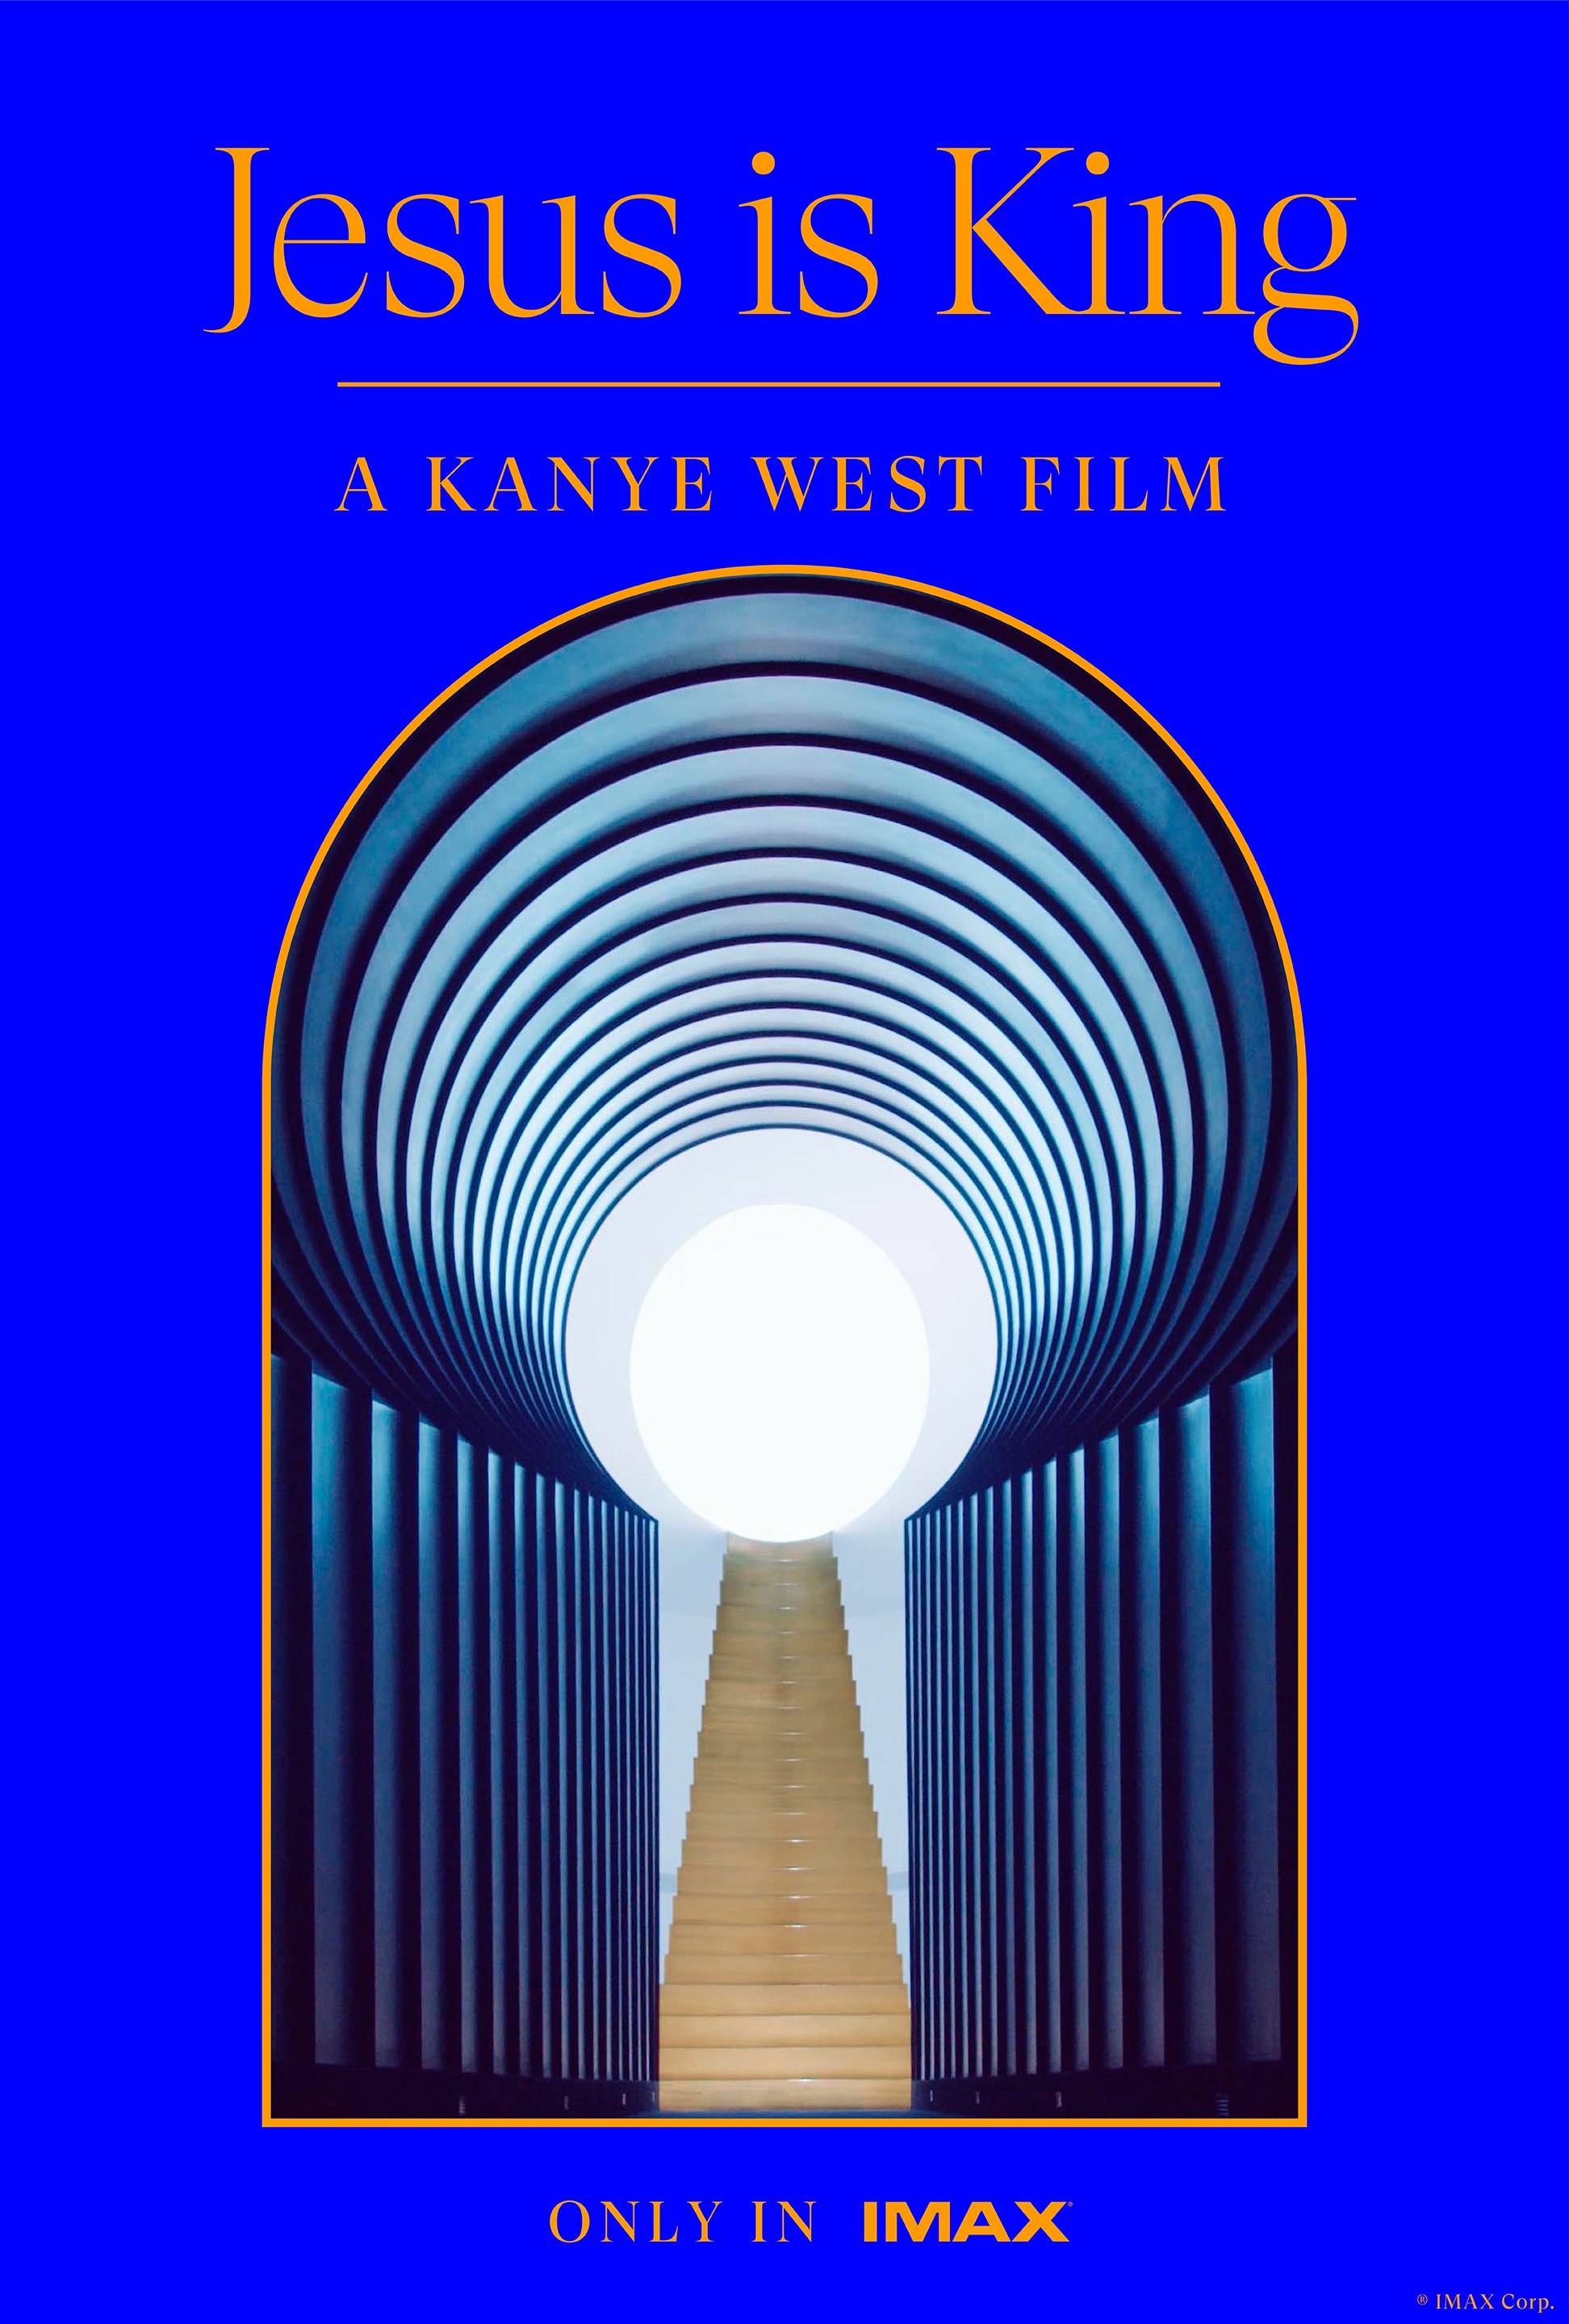 Kanye West Announces <i>Jesus Is King</i> Documentary” title=”IMAX-Jesus_is_King_27x40_RGB-1569769733″ data-original-id=”344133″ data-adjusted-id=”344133″ class=”sm_size_full_width sm_alignment_center ” data-image-use=”multiple_use” />
</p>		</div>
				</div>
						</div>
					</div>
		</div>
								</div>
					</div>
		</section>
				<section data-particle_enable=